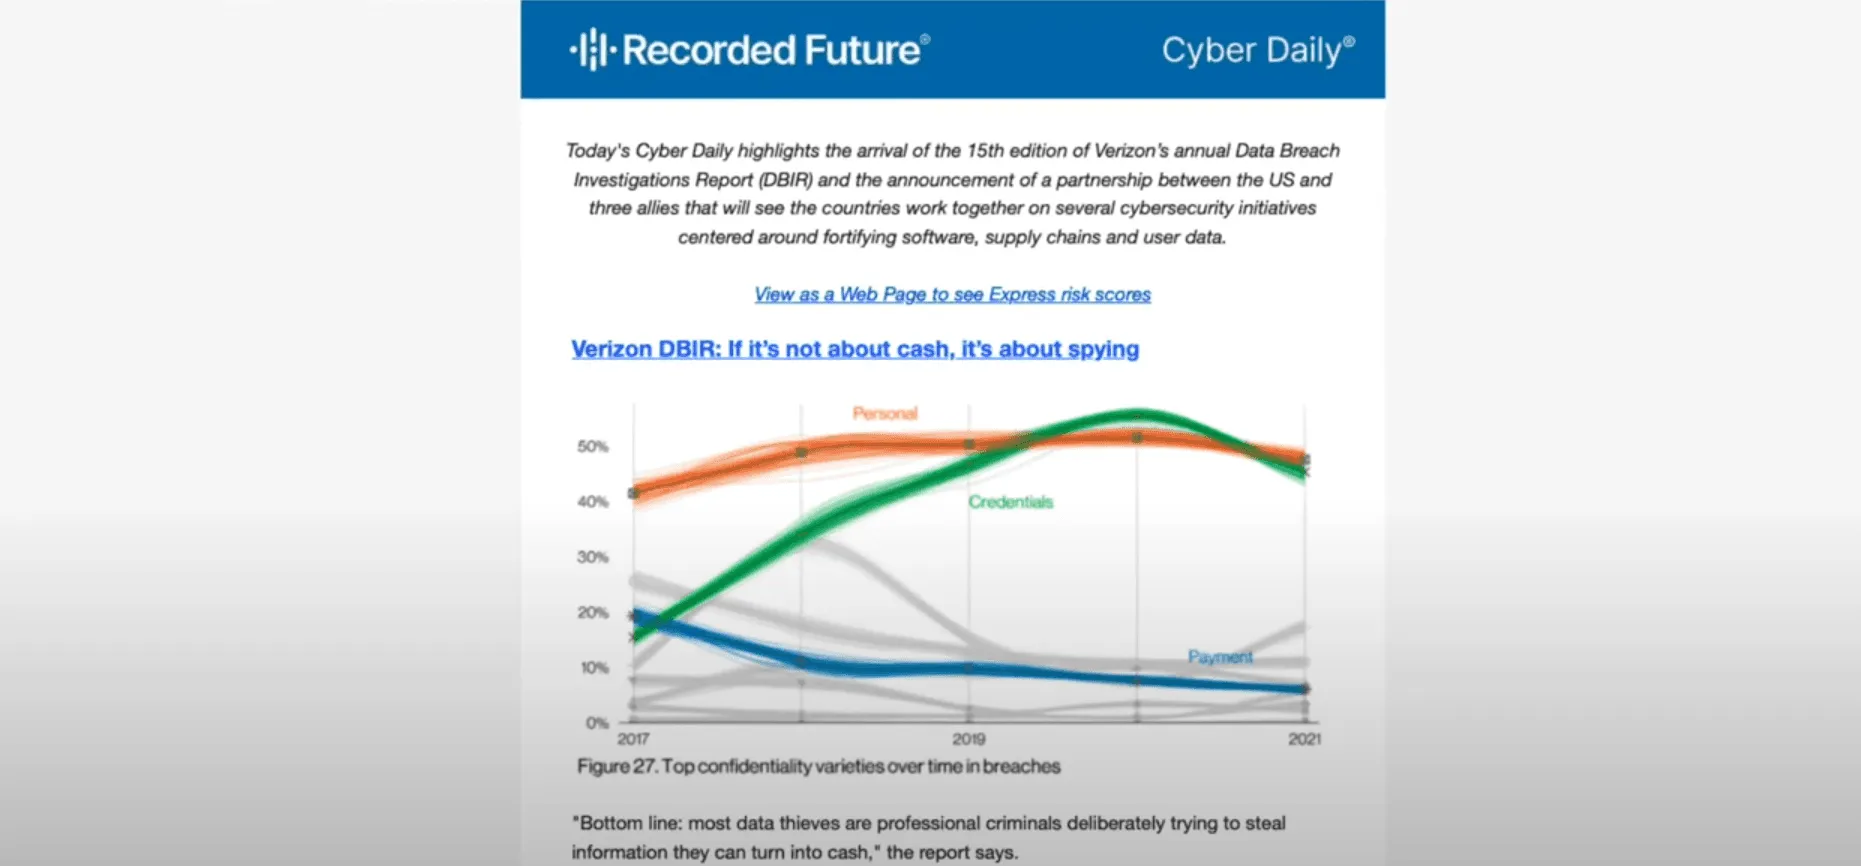 Cyber Daily Overview